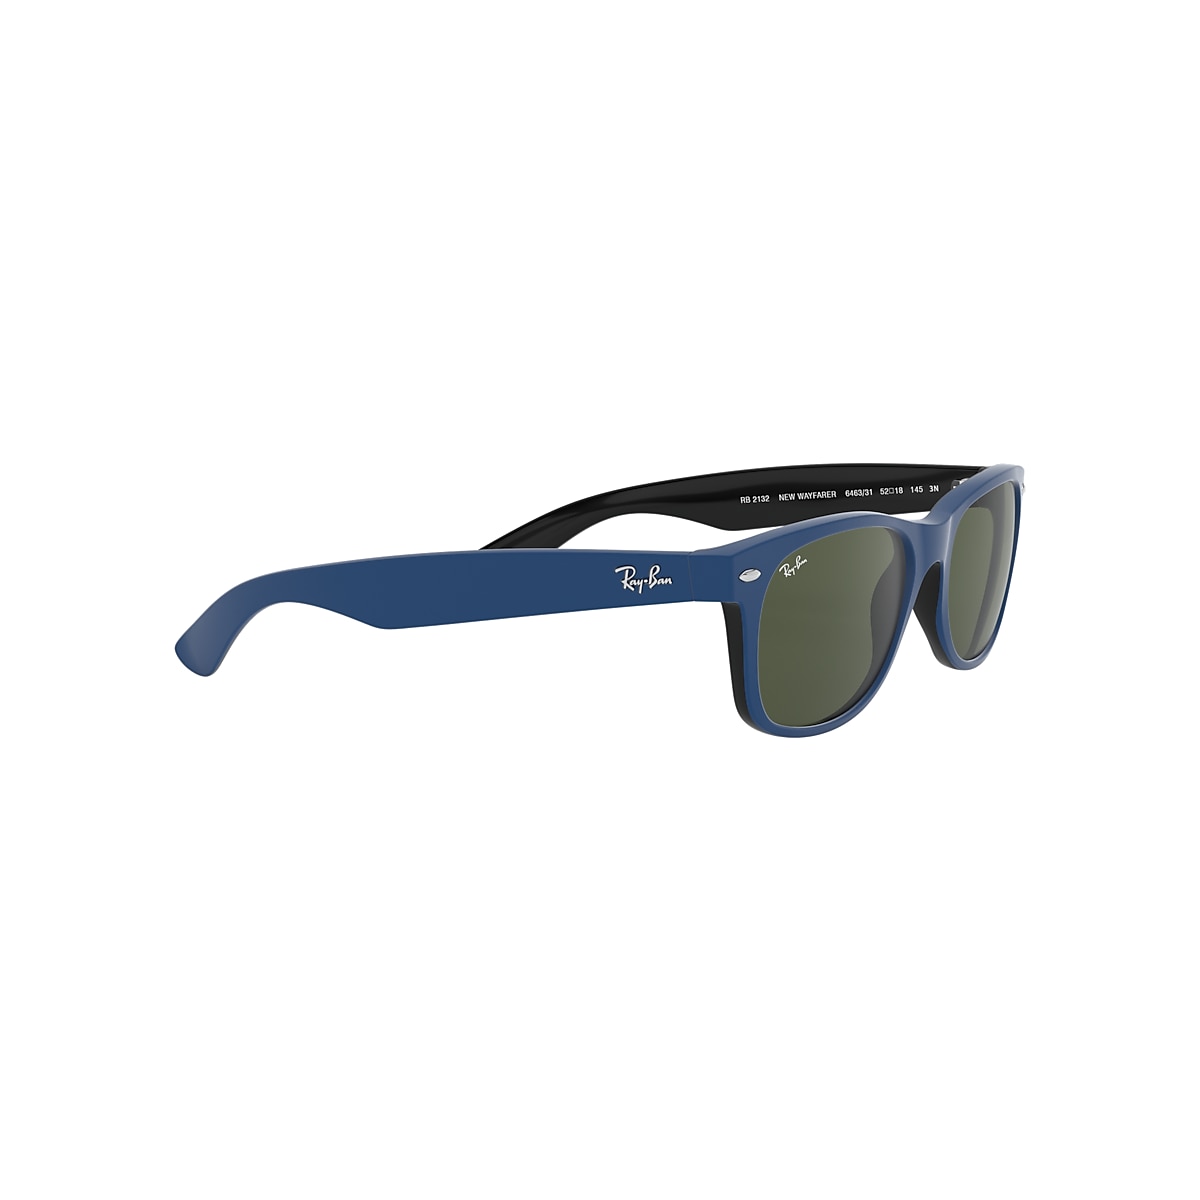 NEW WAYFARER Blue Sunglasses MIX - COLOR RB2132 and Ray-Ban® | in Green US